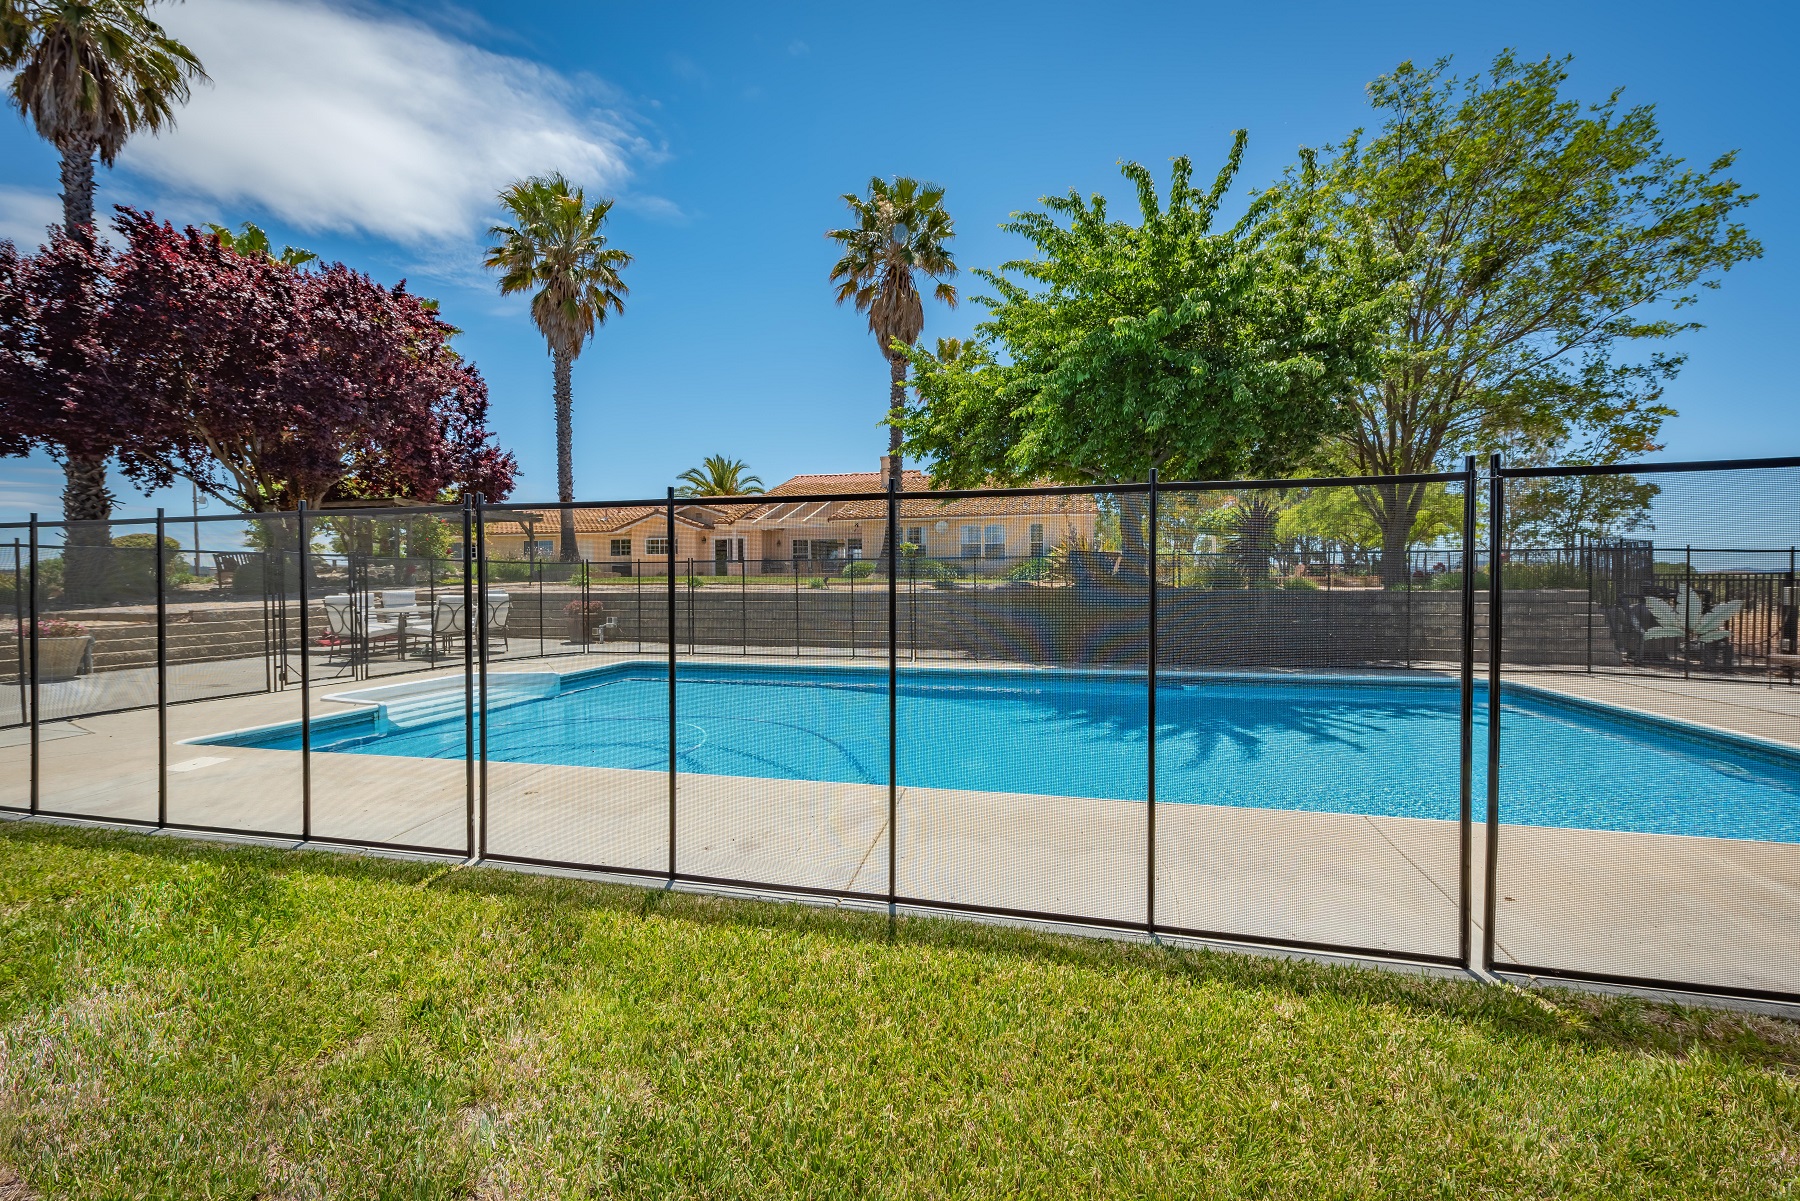 The pool fencing is for kids' safety